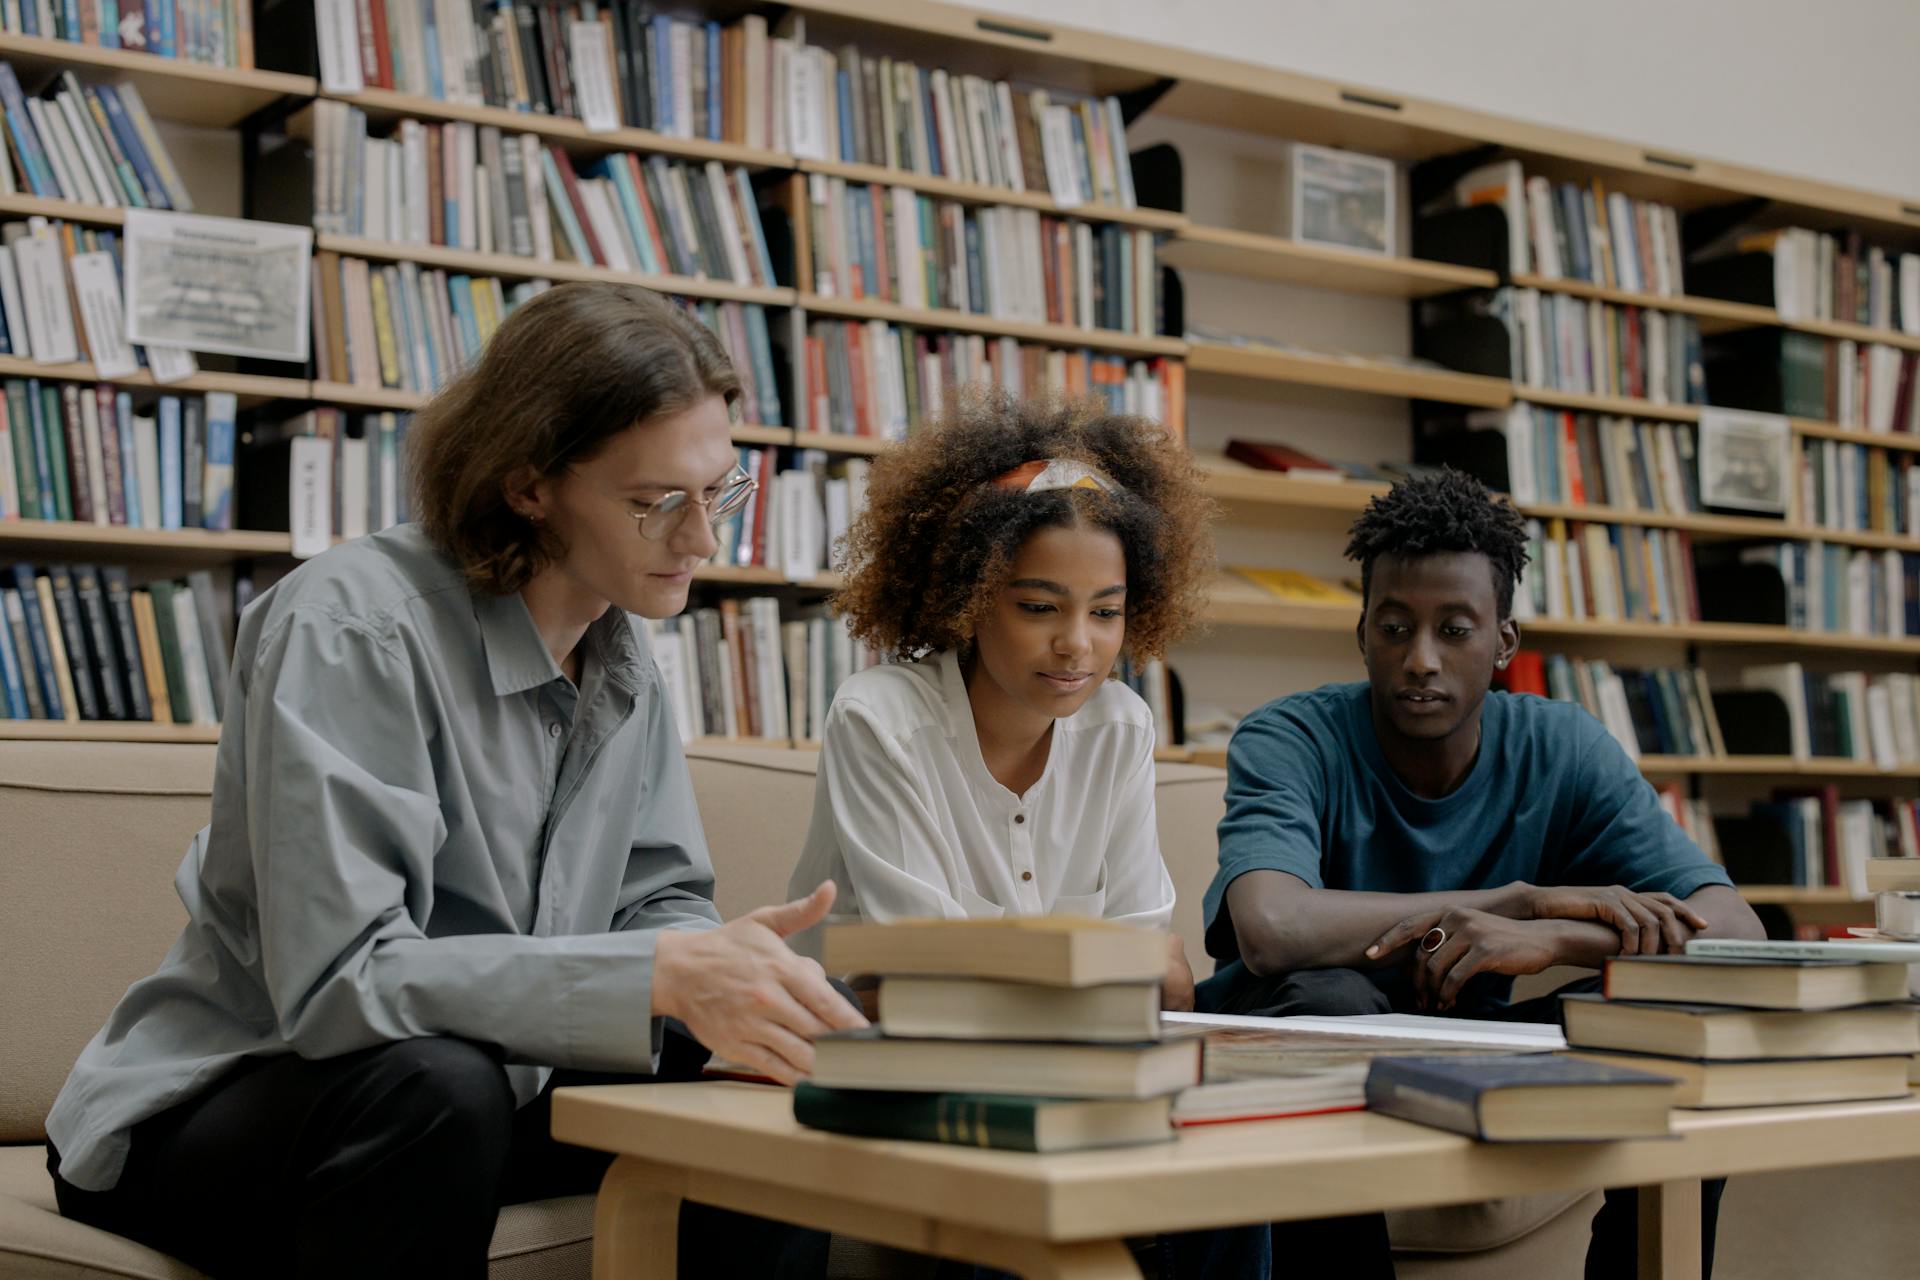 Students in a library | Source: Pexels